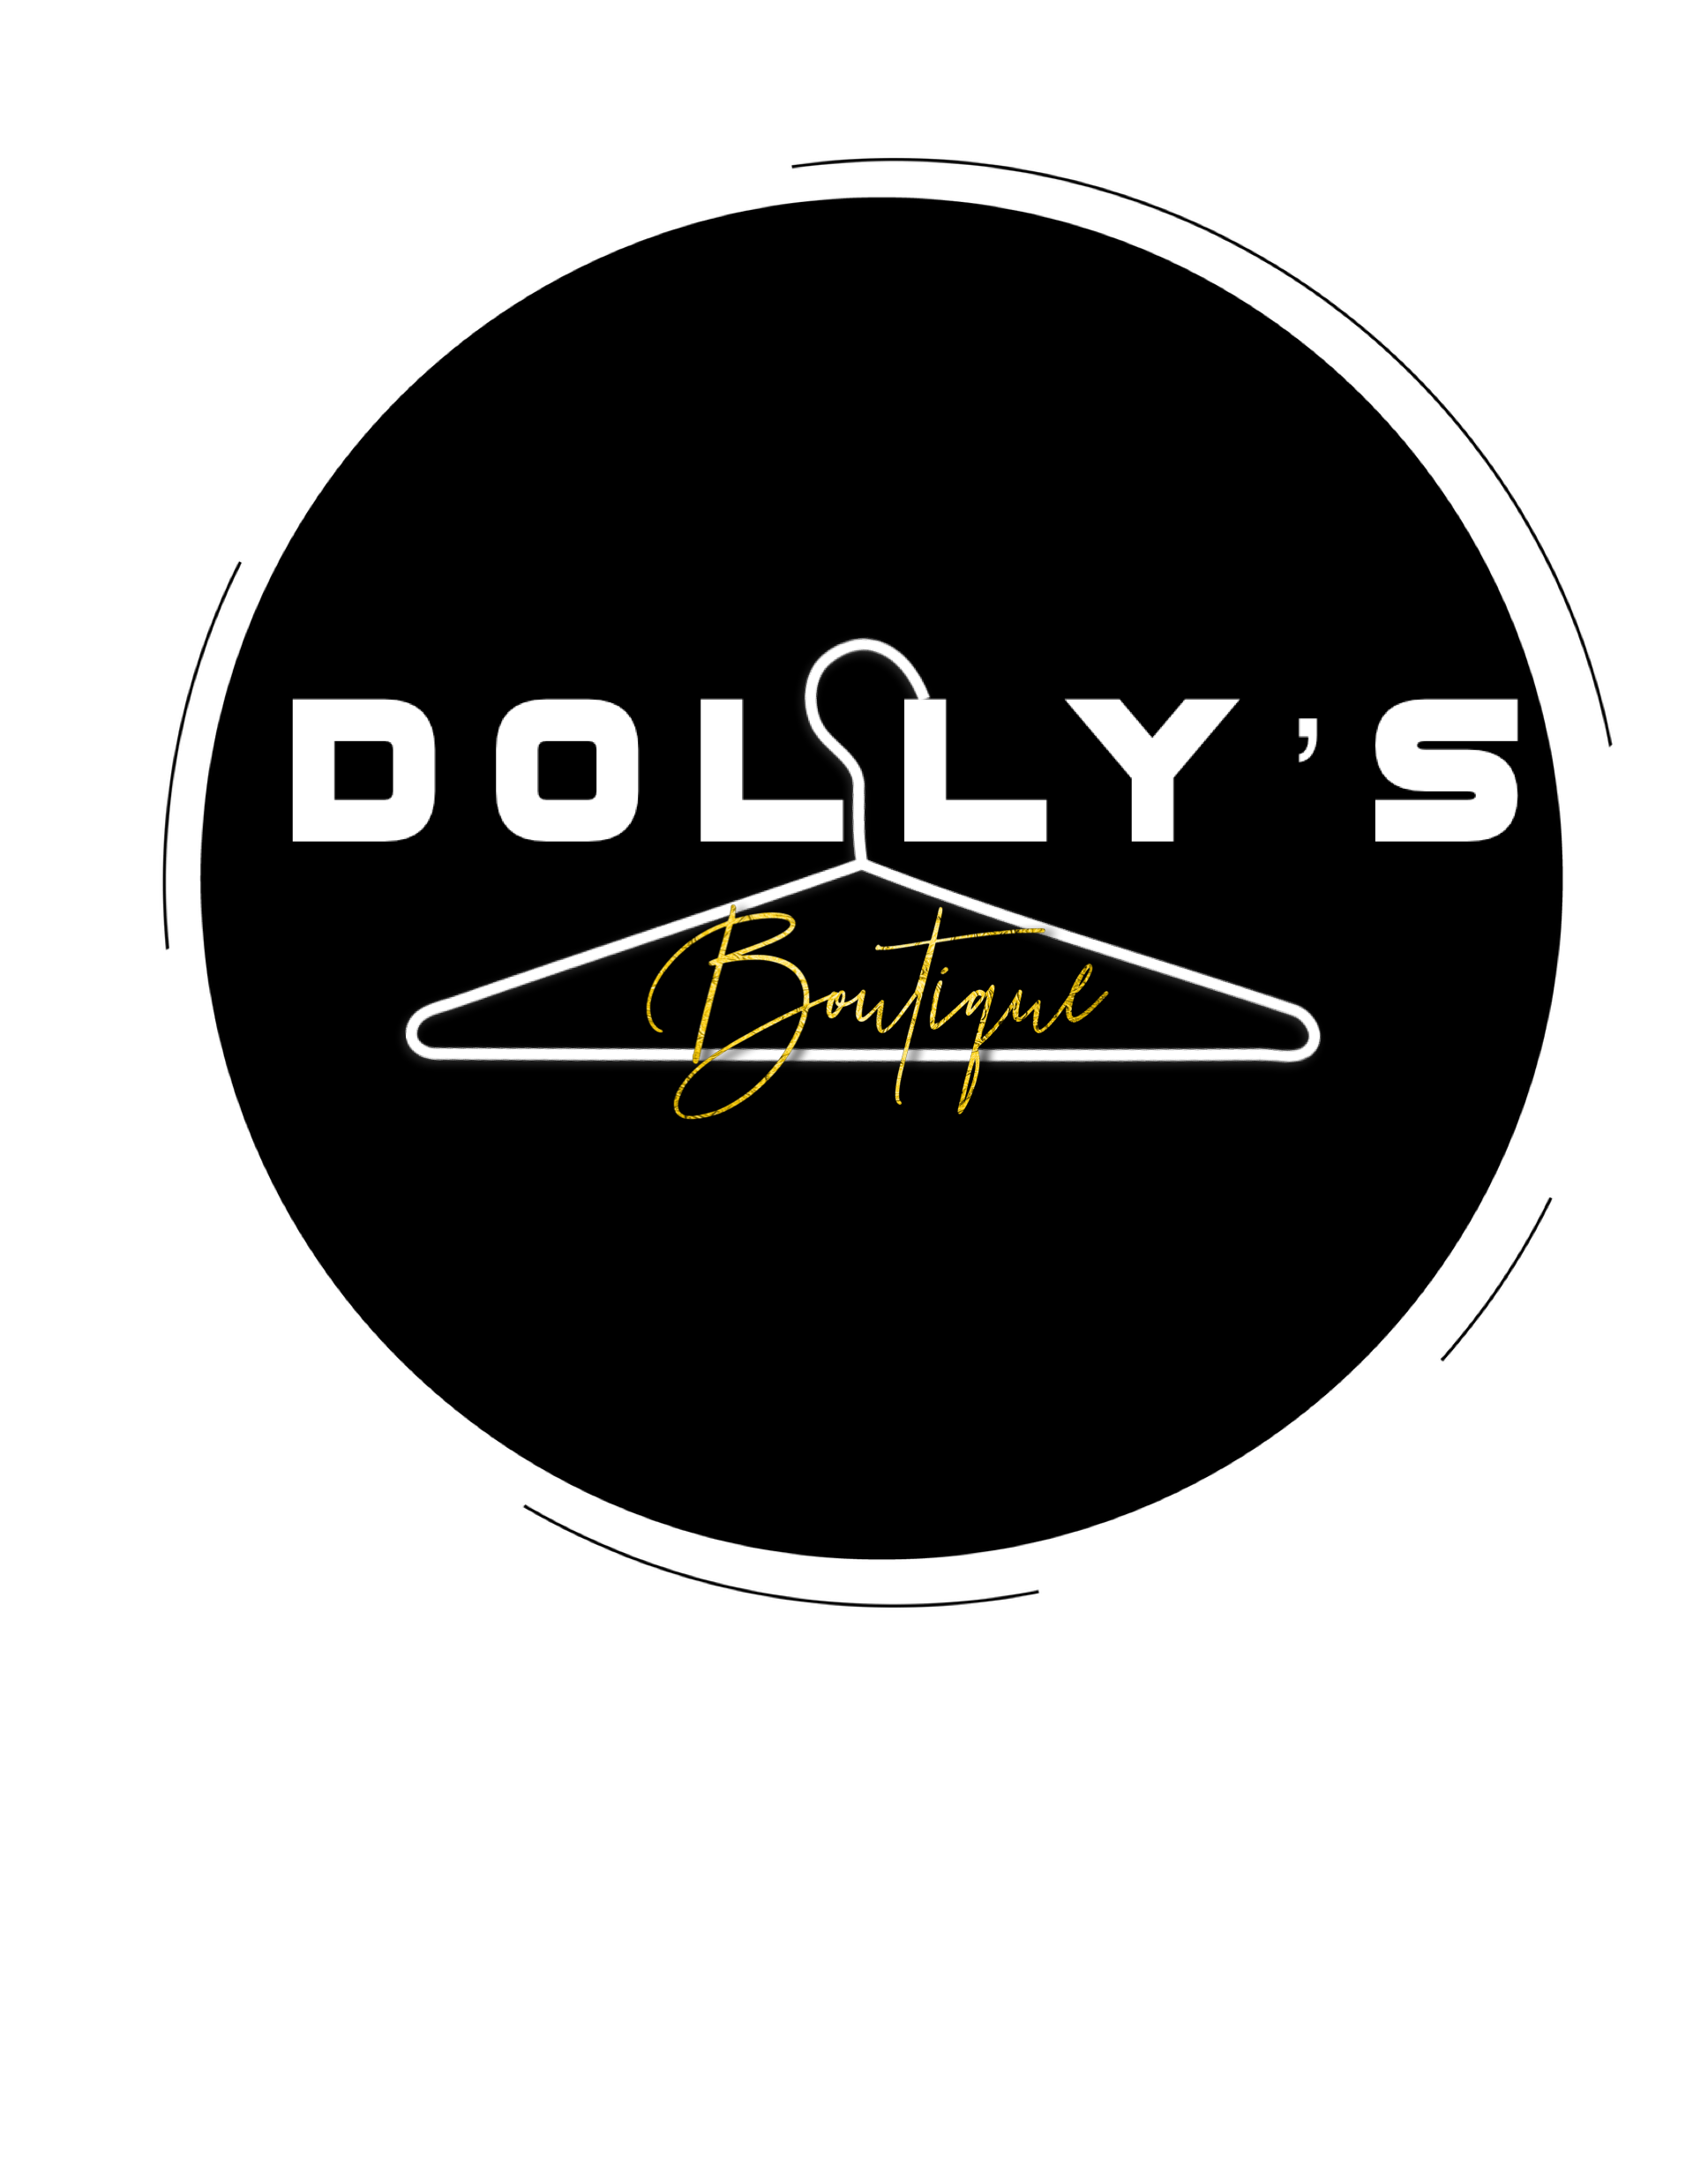 Dolly's Boutique